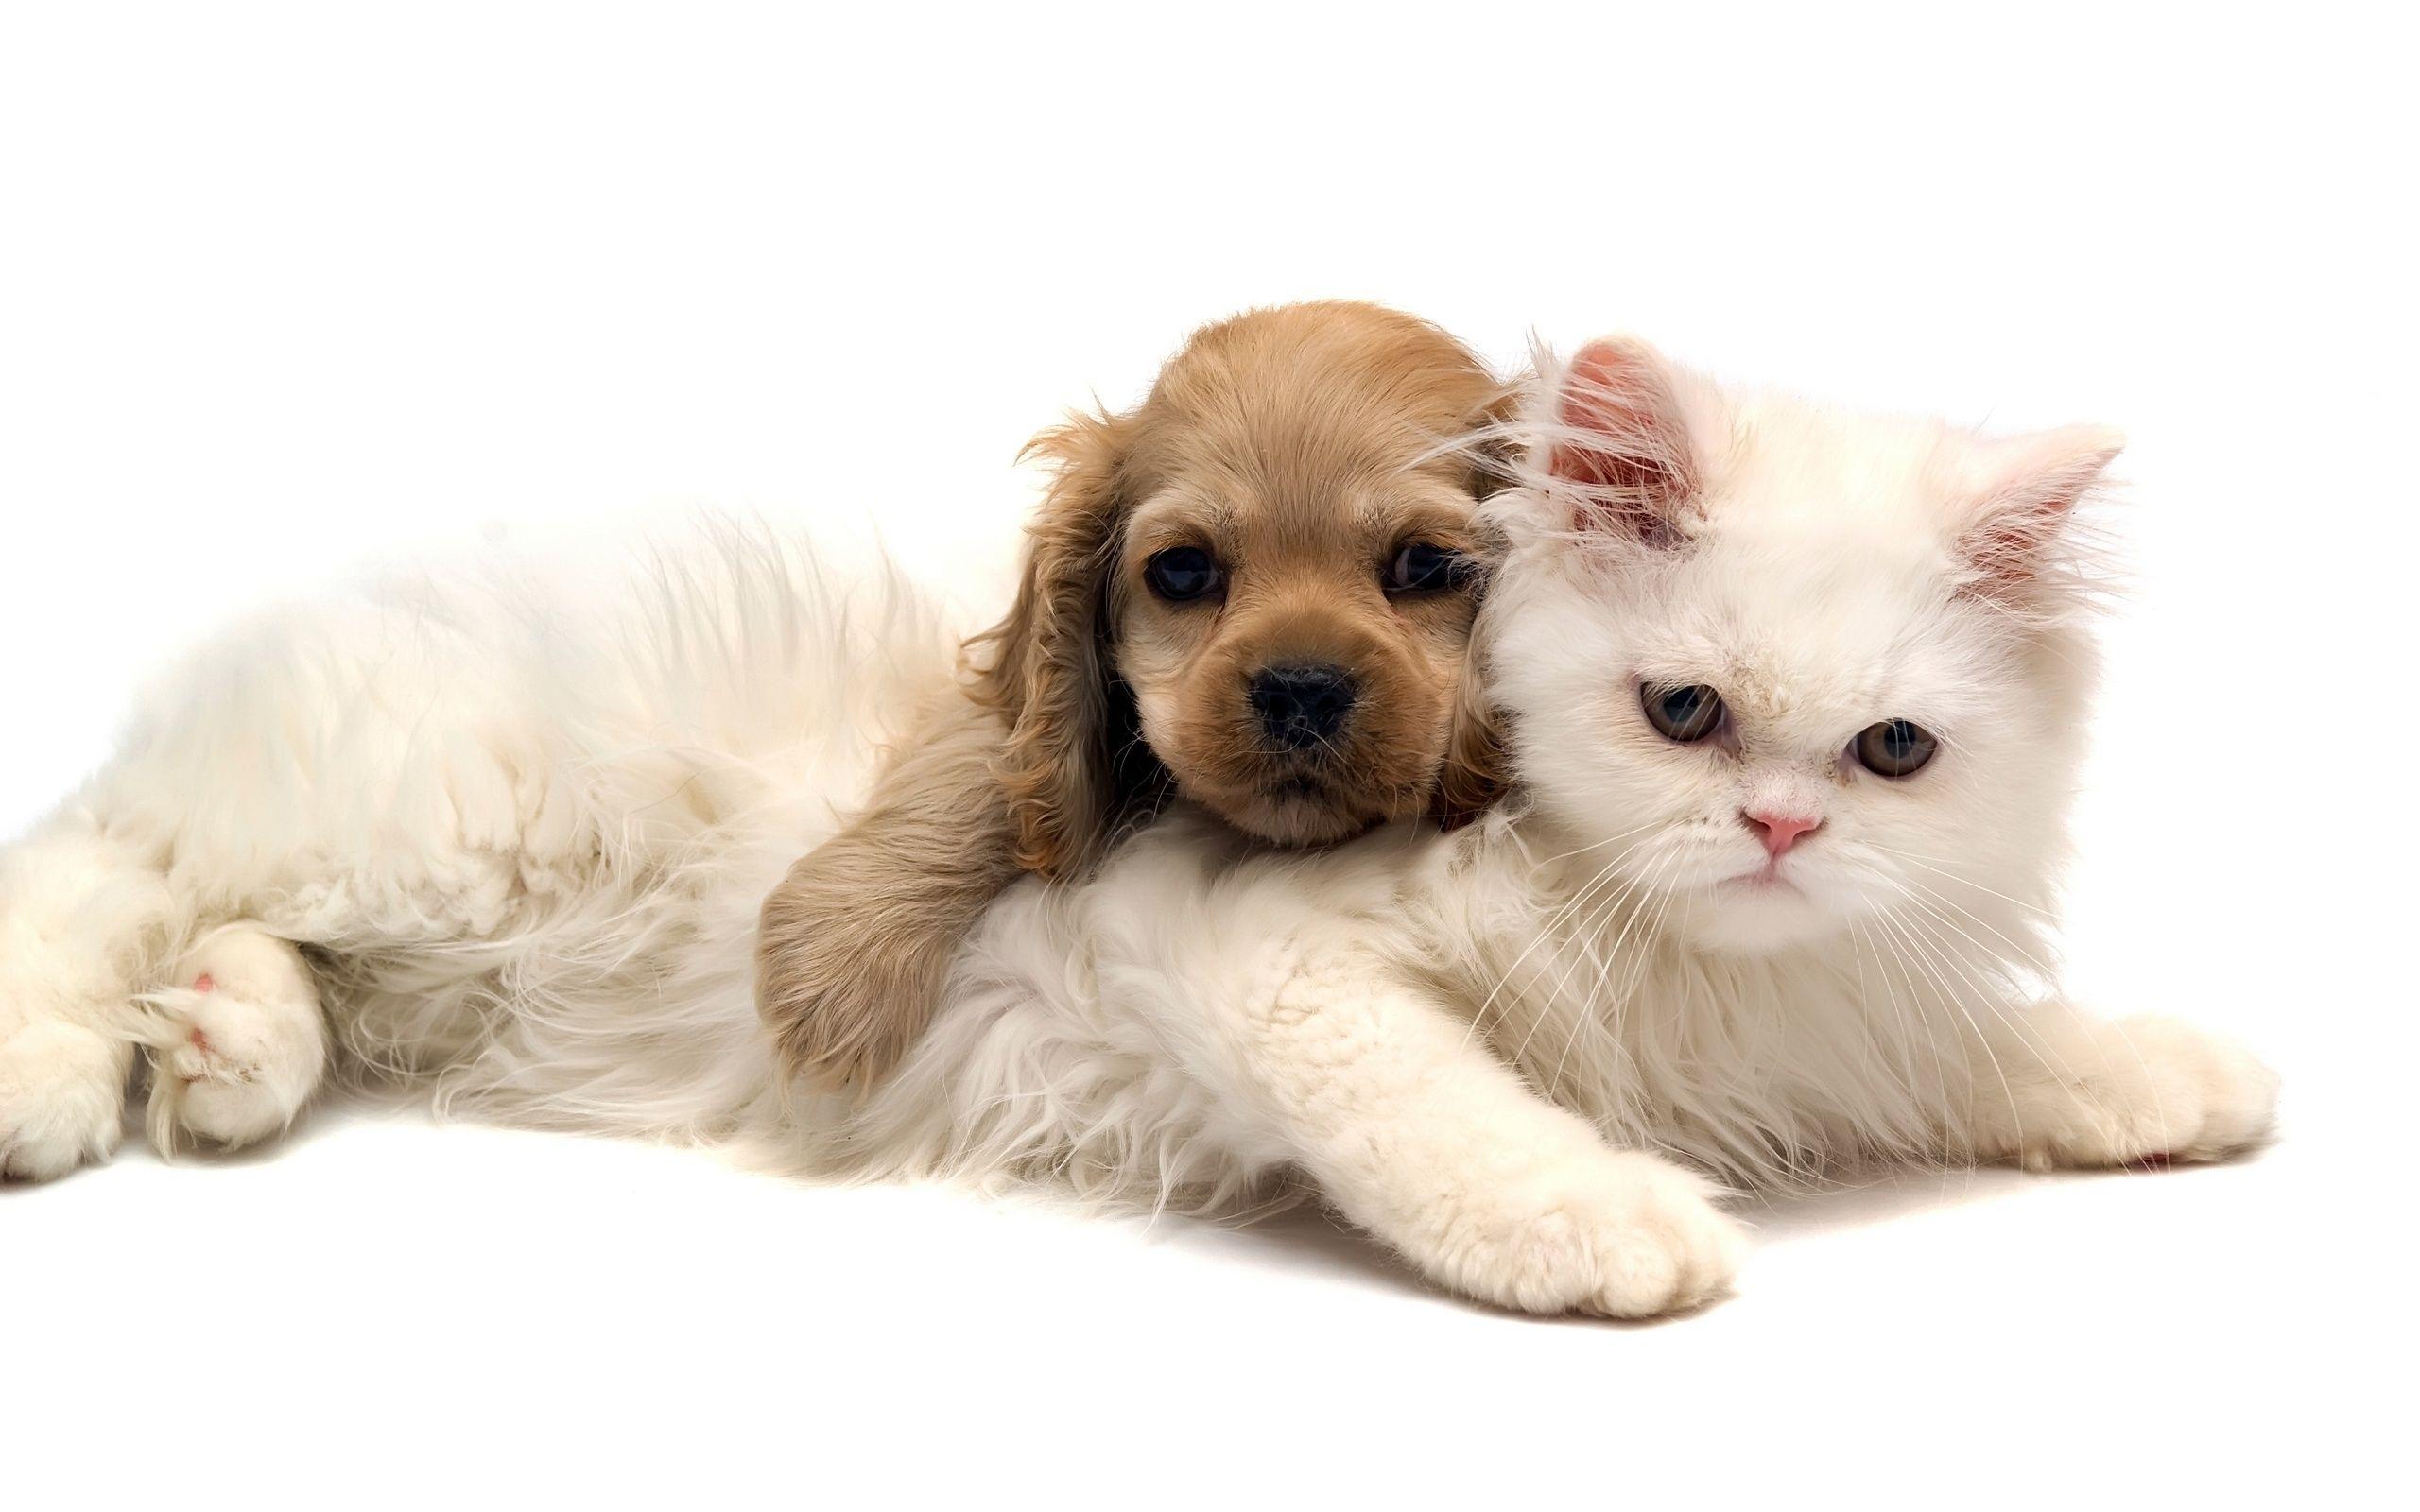 cute baby kittens and puppies together